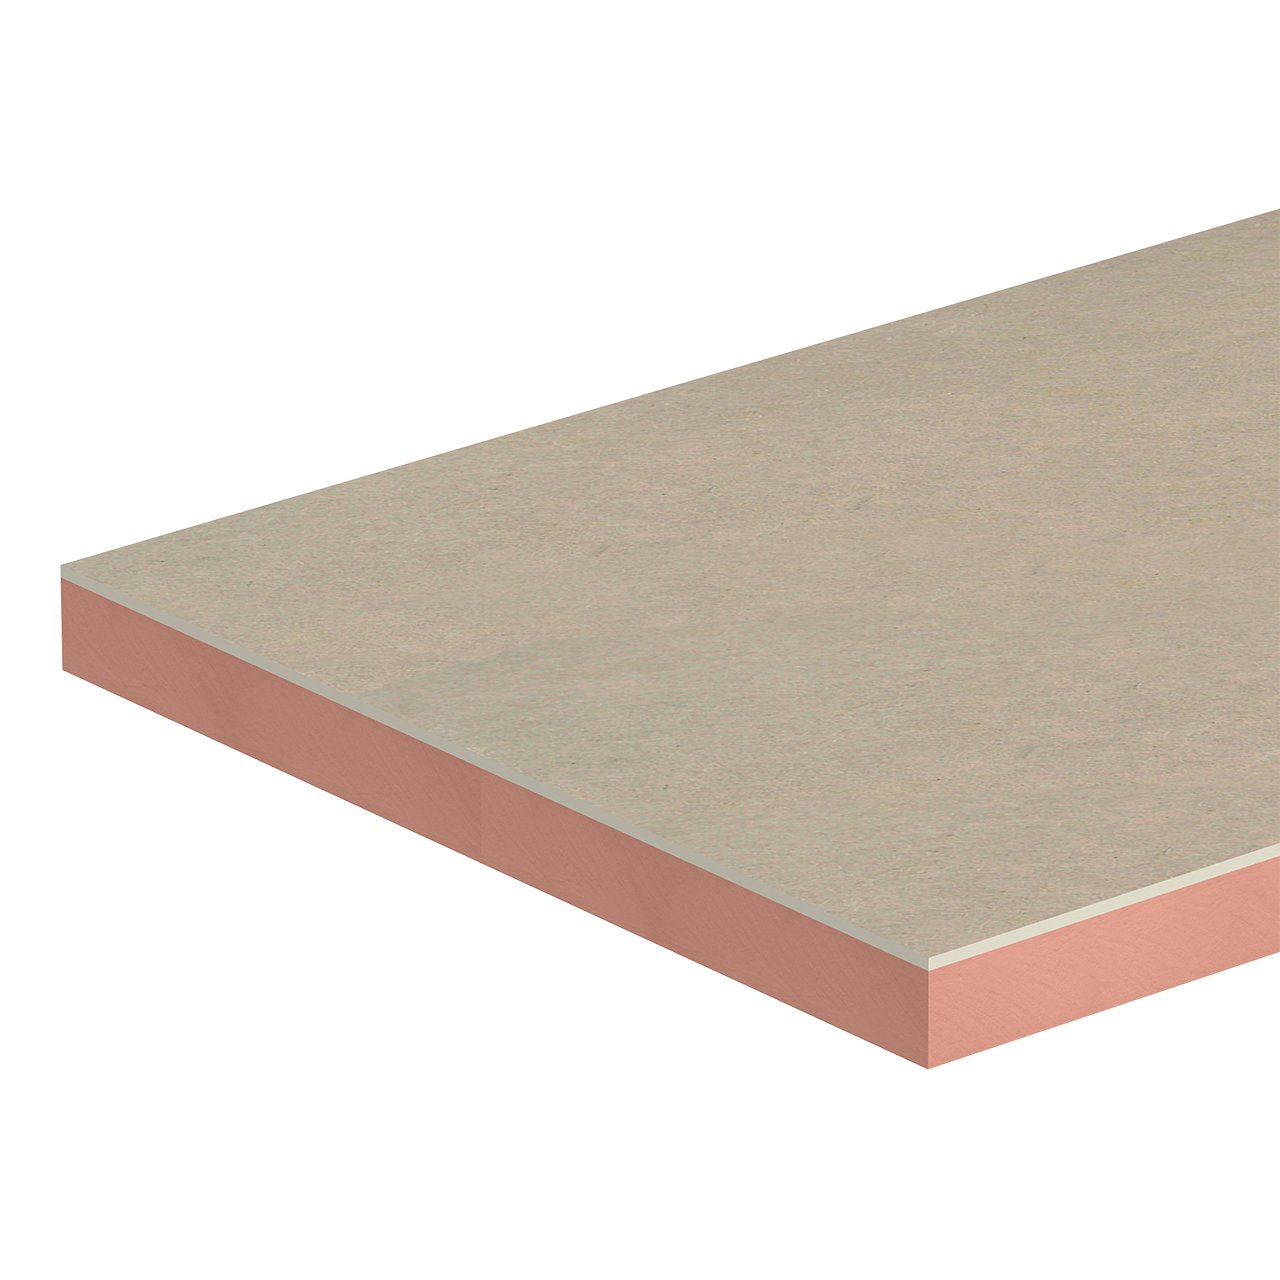 Kingspan Kooltherm K118 Insulated Plasterboard 2400mm x 1200mm (Pack of 18) 30mm thickness